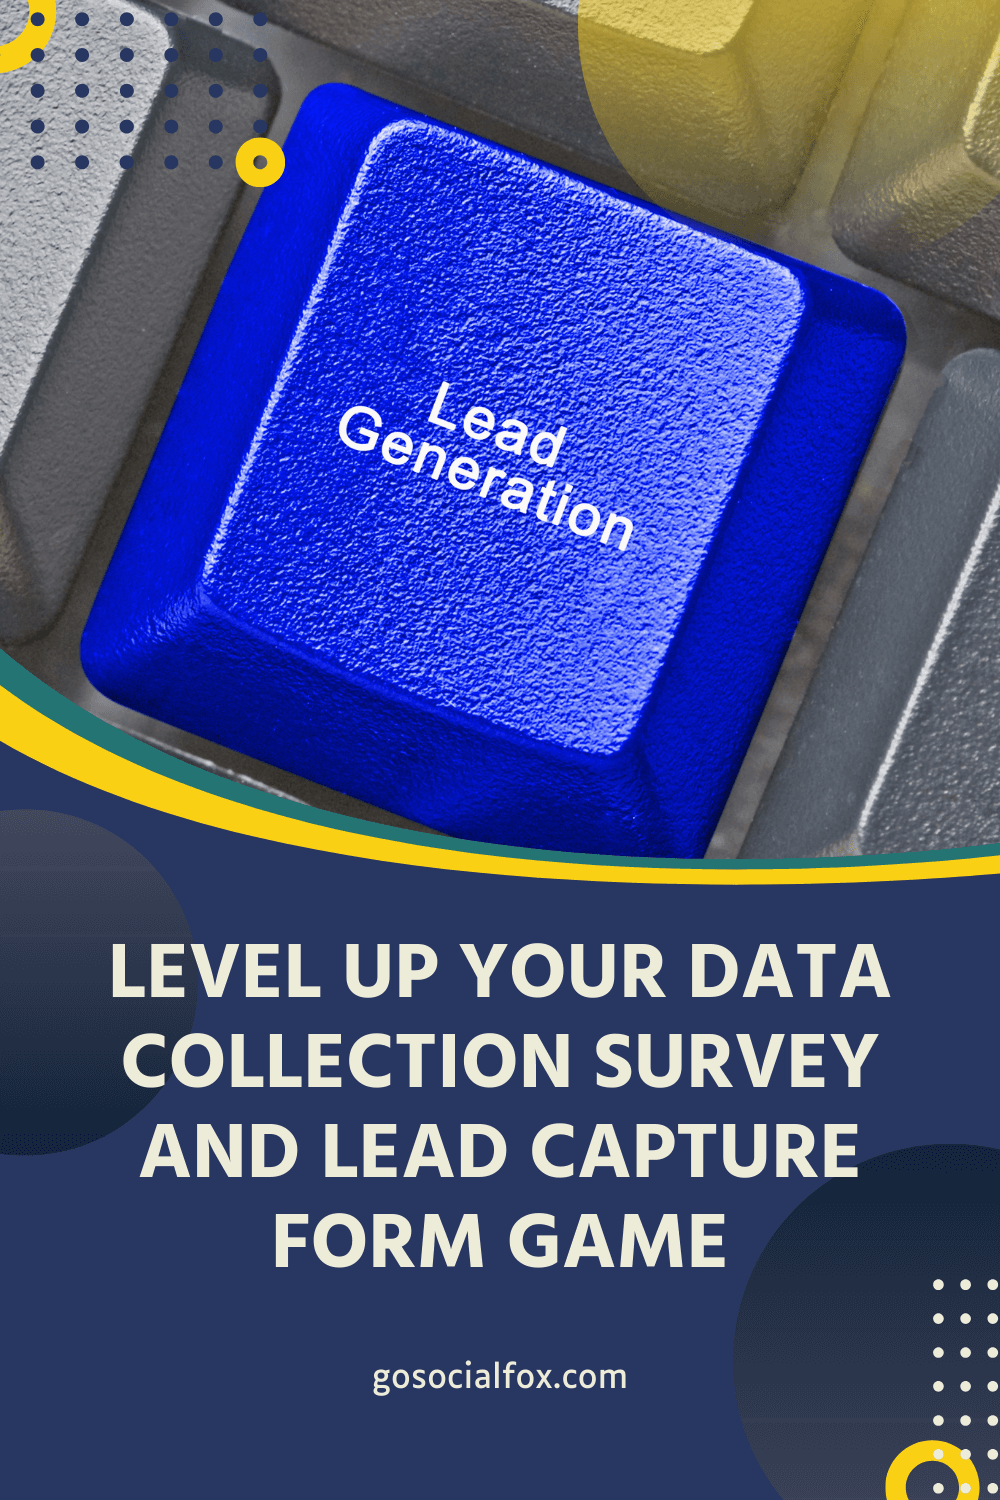 When to Use Lead Capture Forms vs Data Collection Surveys